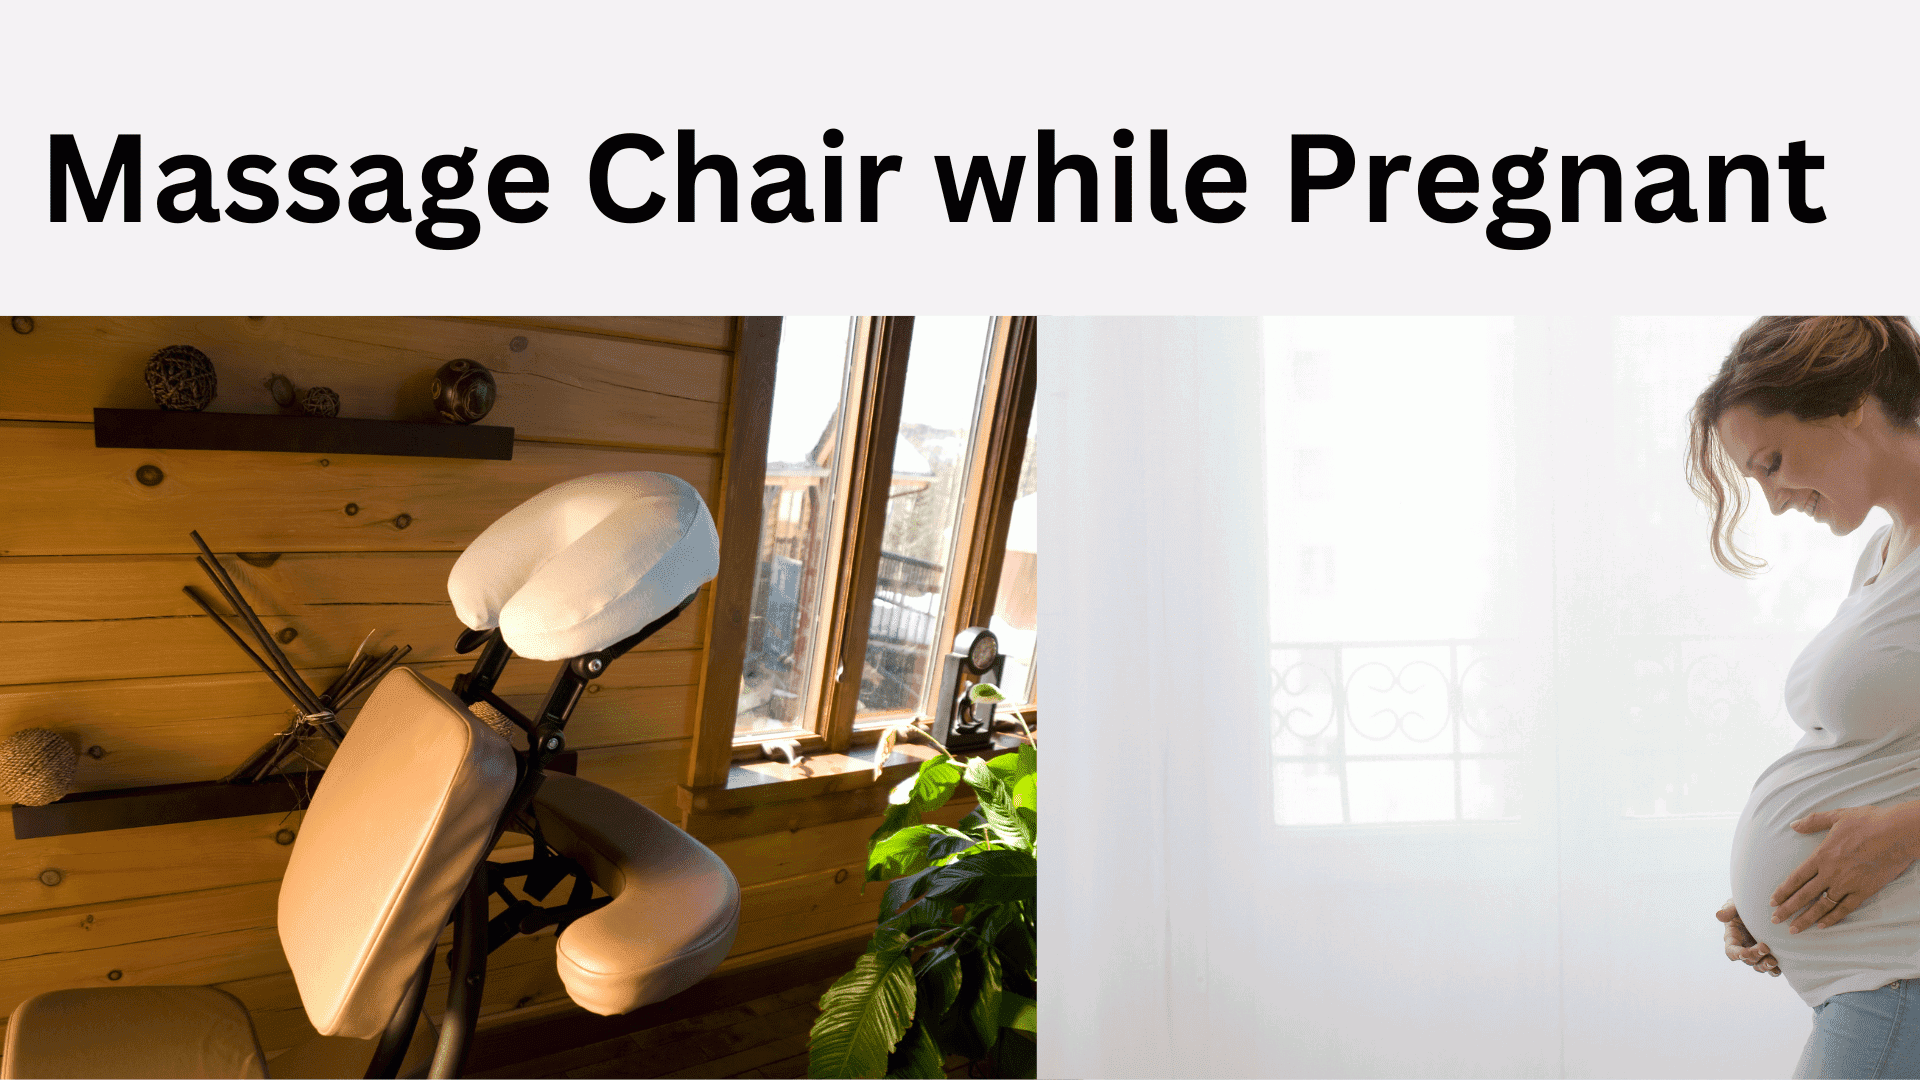 Can I use a massage chair while pregnant?